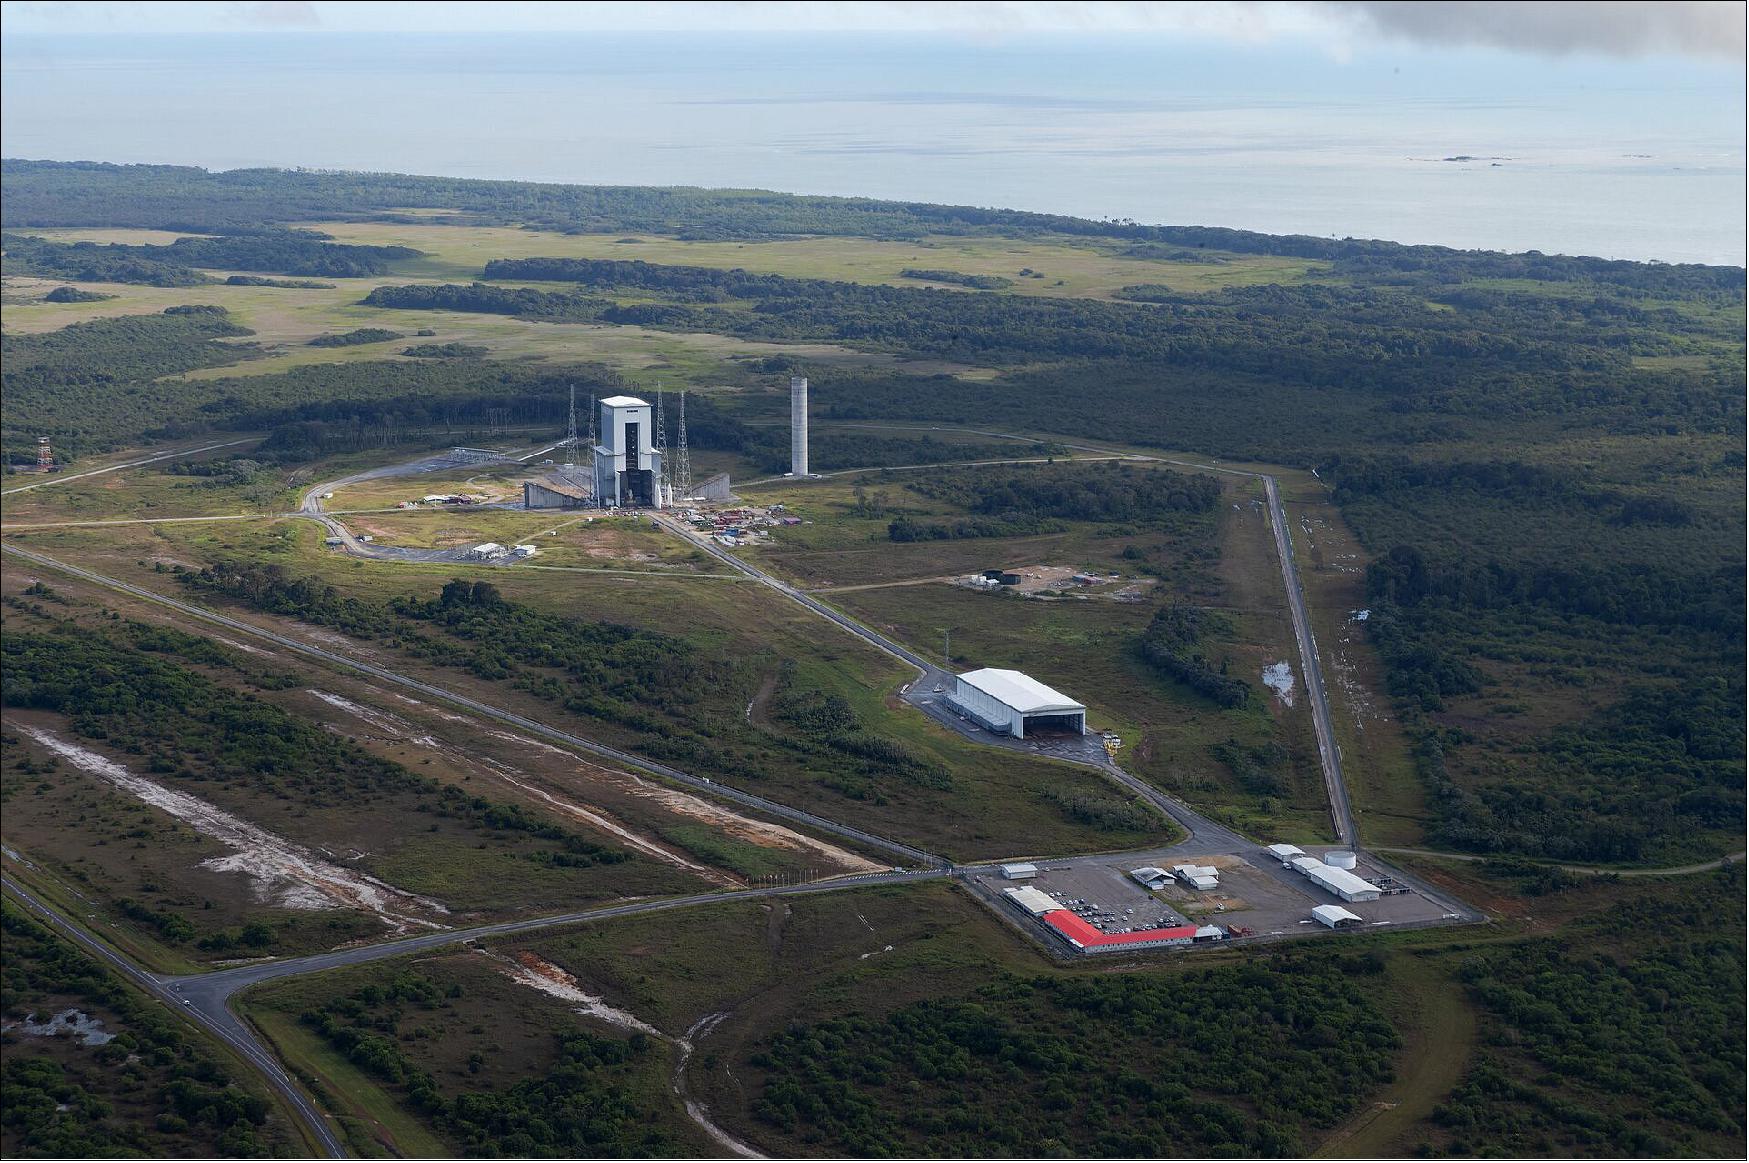 Figure 28: The Ariane 6 launch complex at Europe's Spaceport in Kourou, French Guiana (image credit: ESA, S. Corvaja)